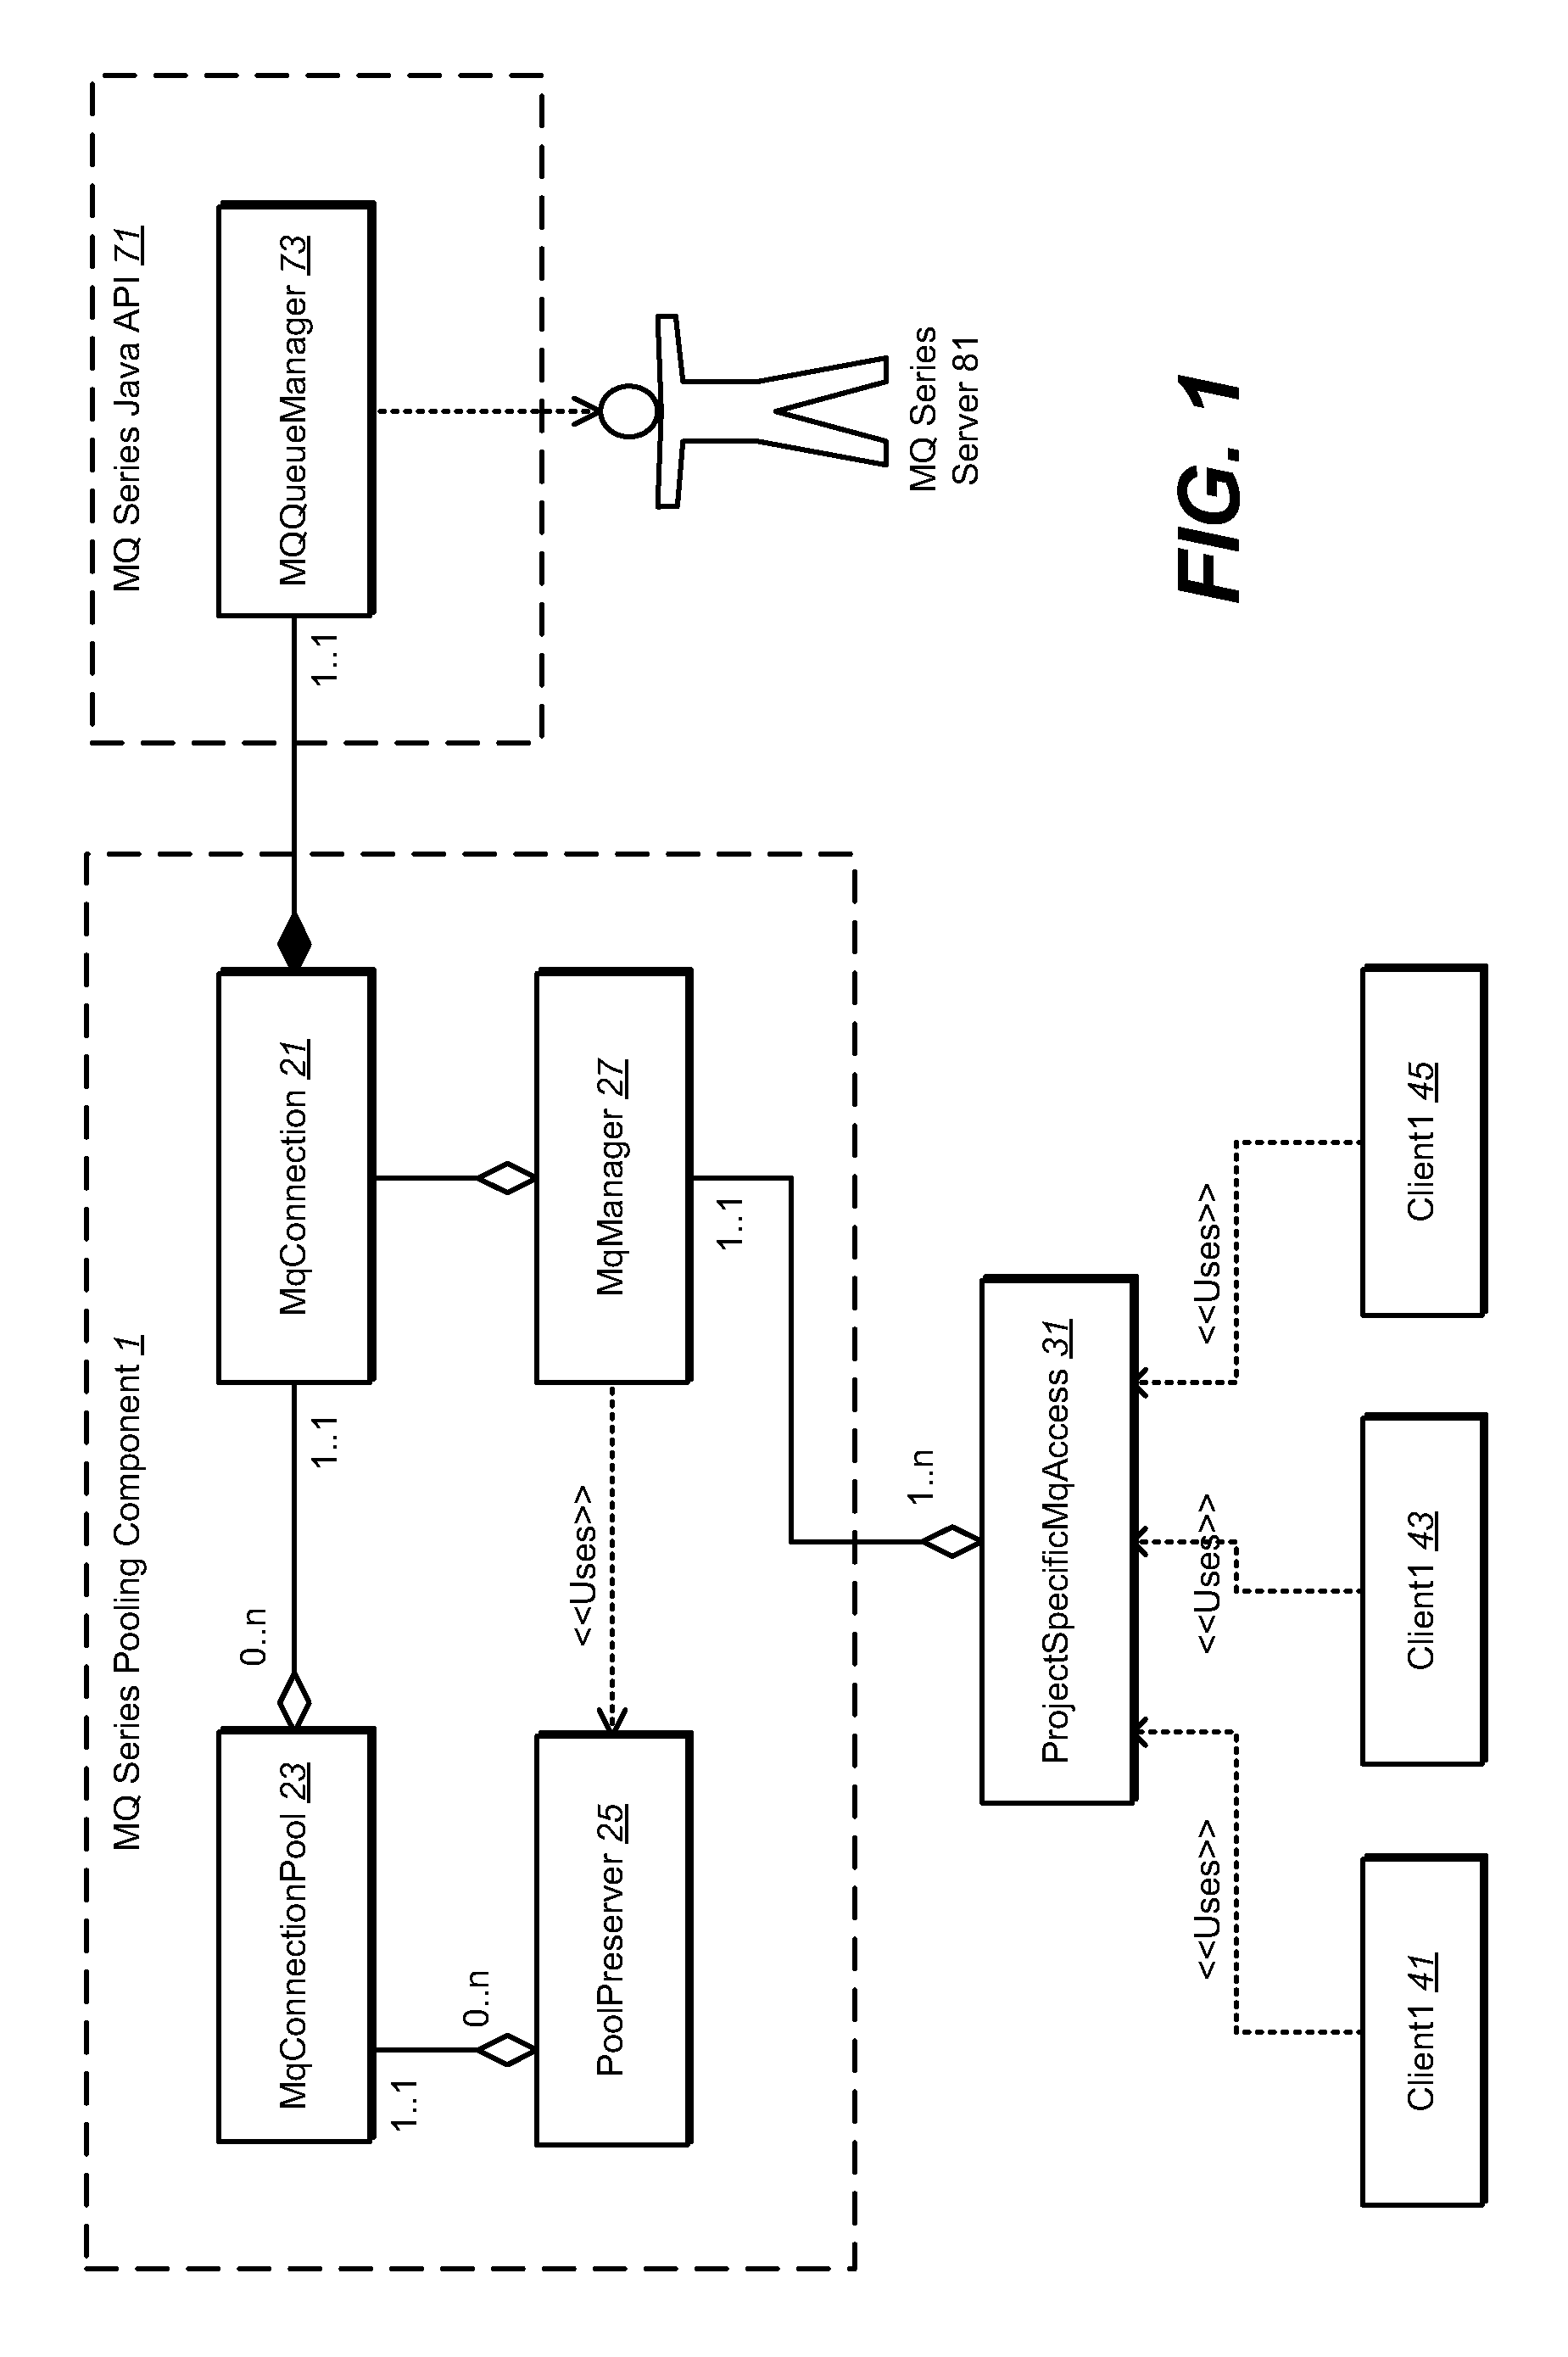 Message queuing method, system, and program product with reusable pooling component